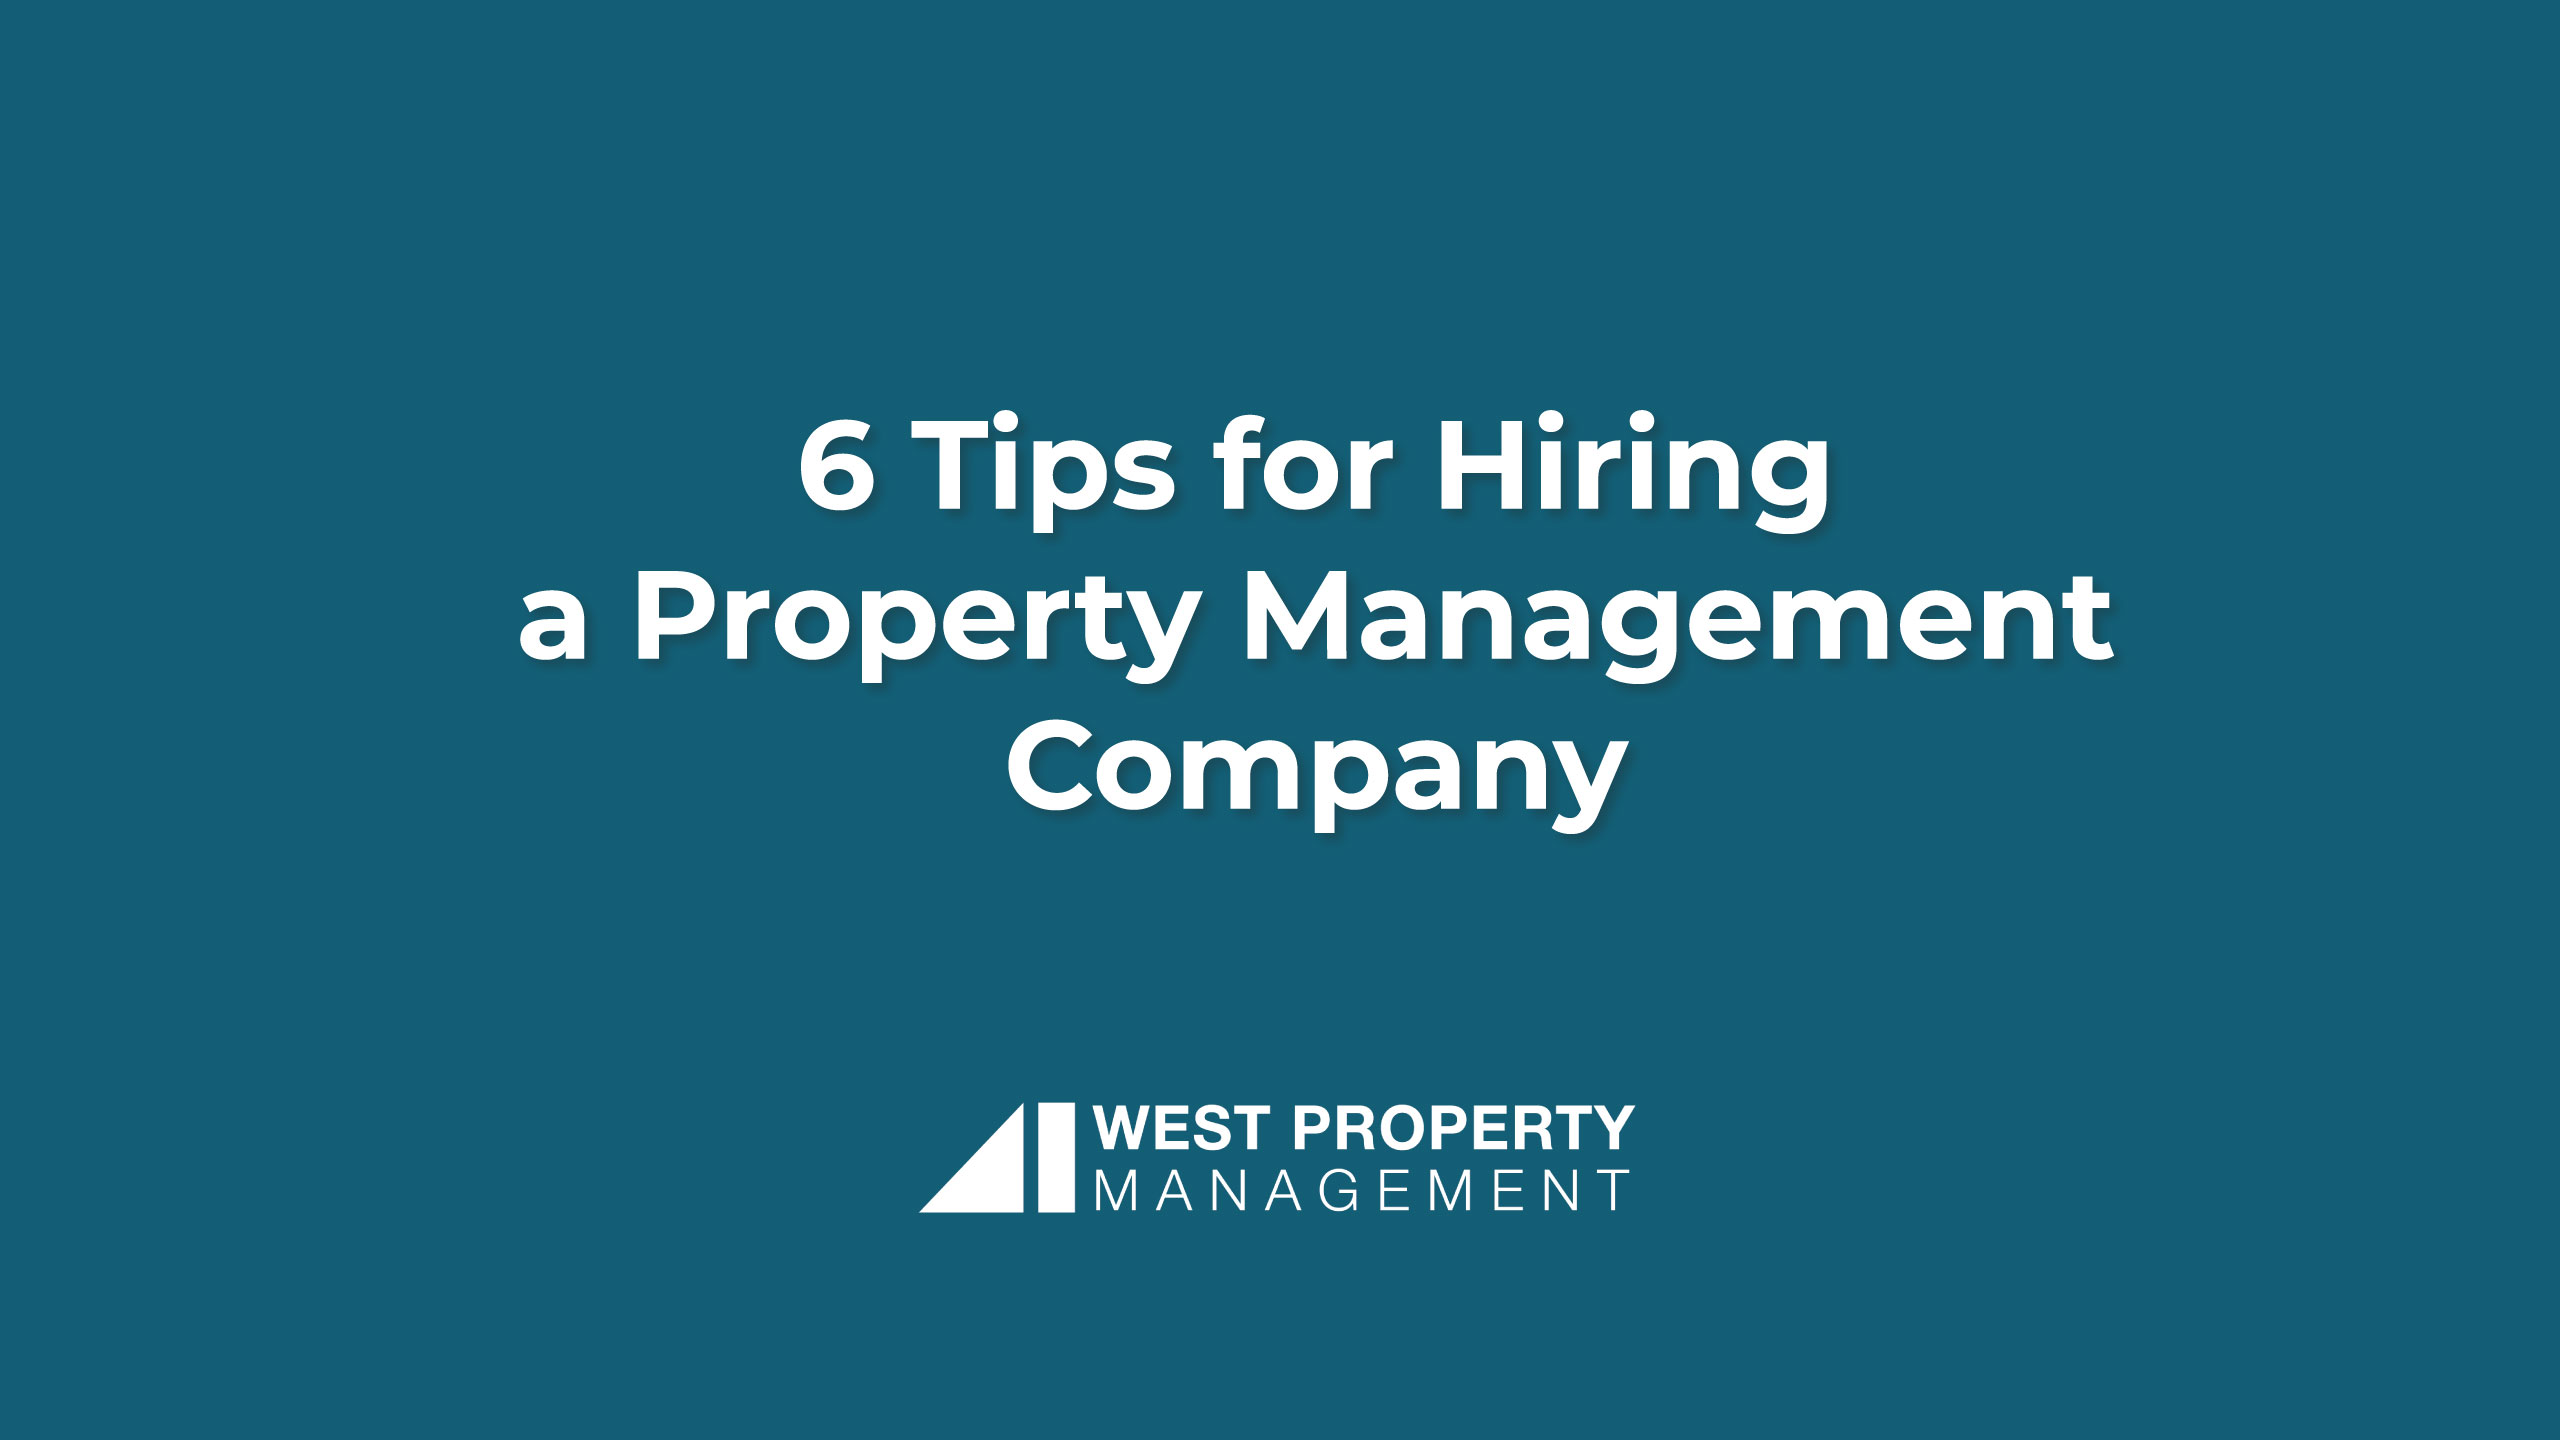 6 Tips for Hiring a Property Management Company